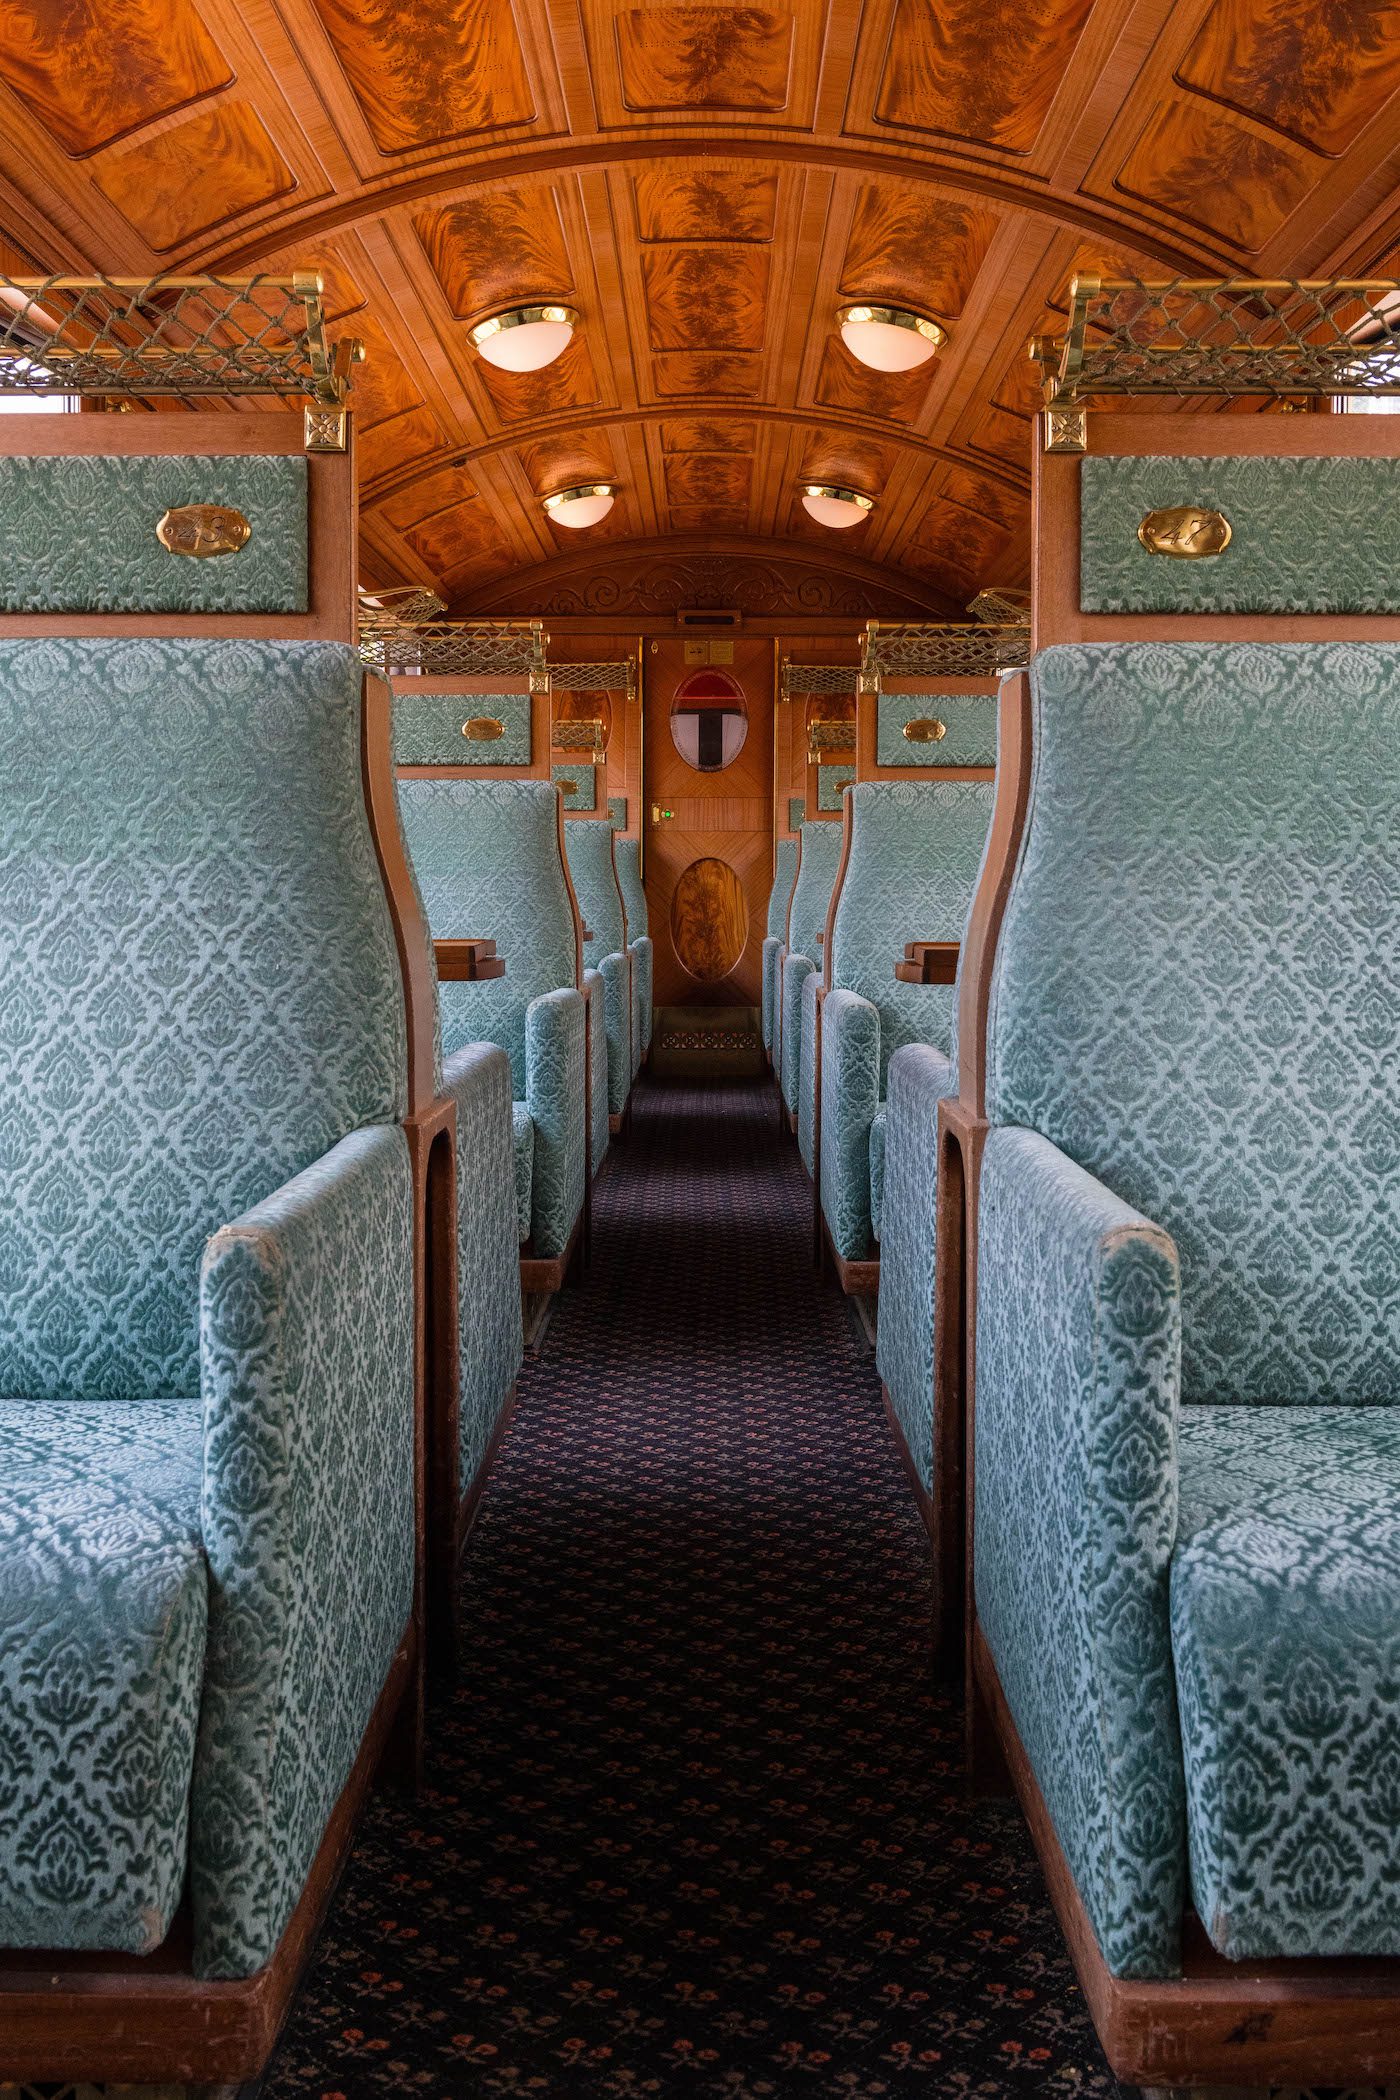 All aboard! Wes Anderson's train carriage celebrates the golden